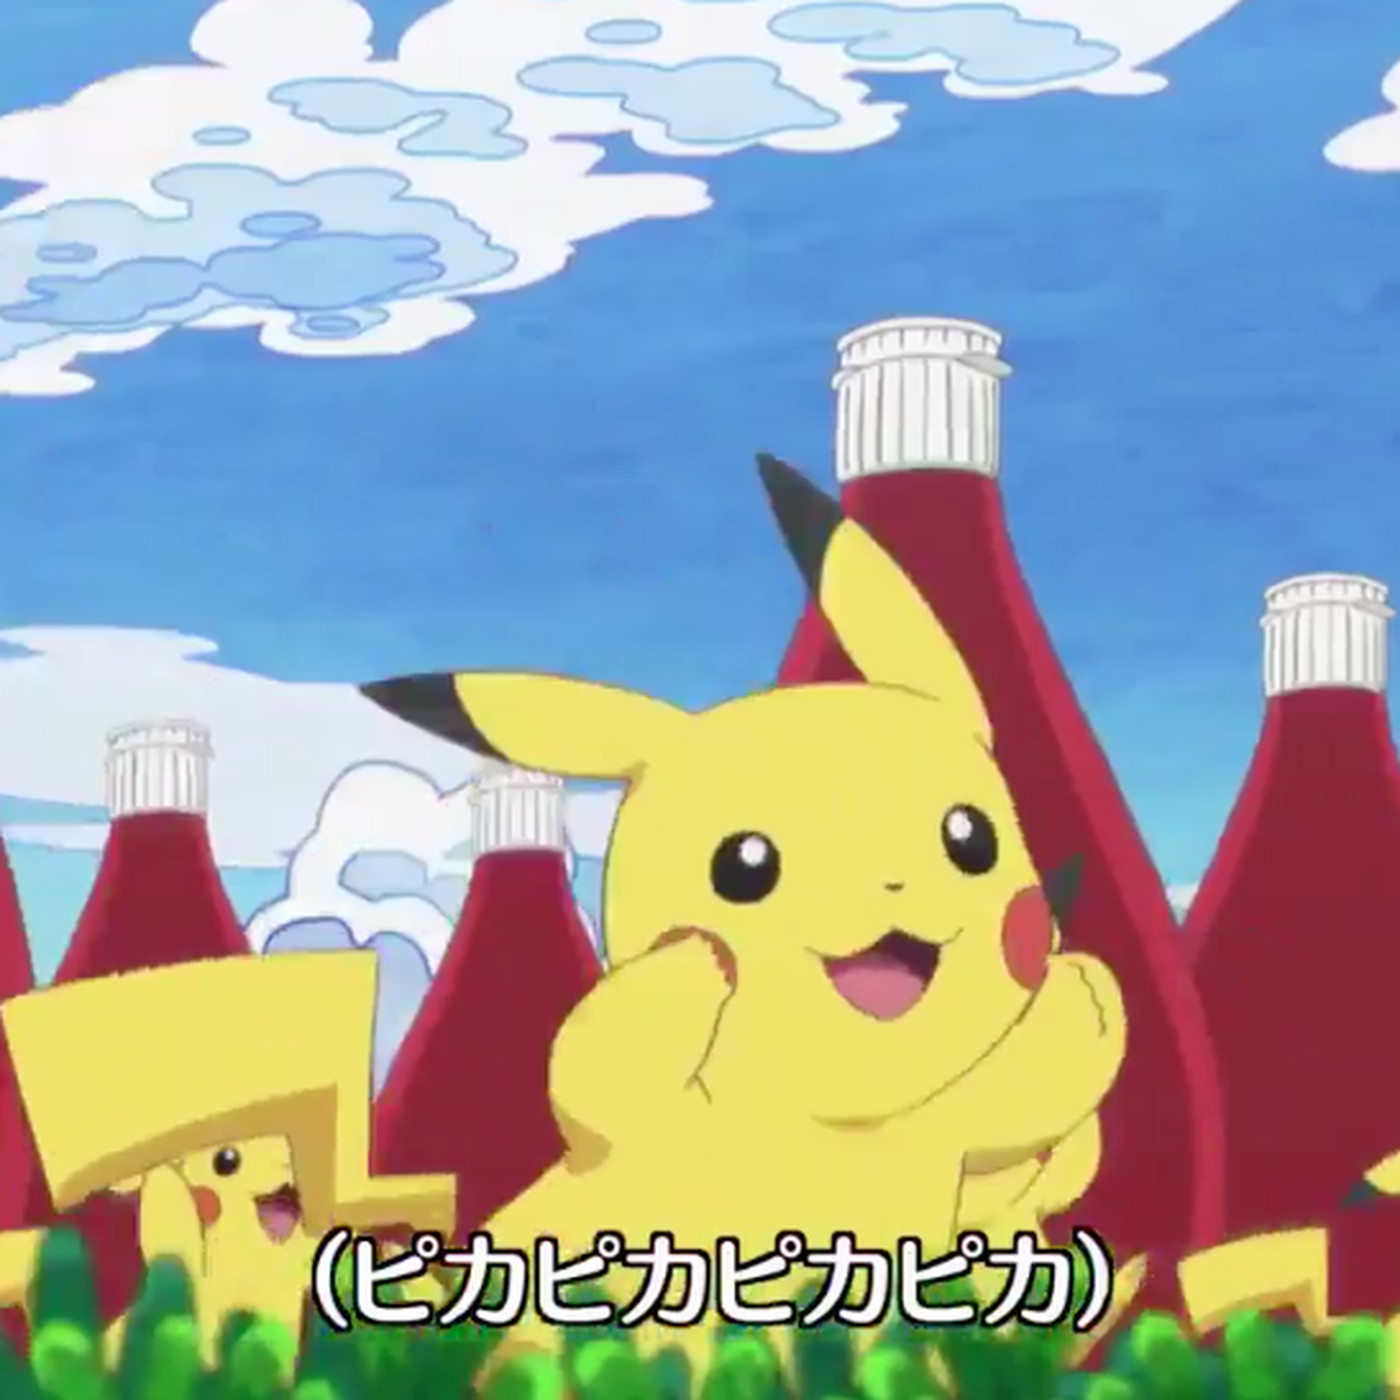 Pikachu S Visit To Ketchup Heaven Is A Happiness We Can Only Aspire.